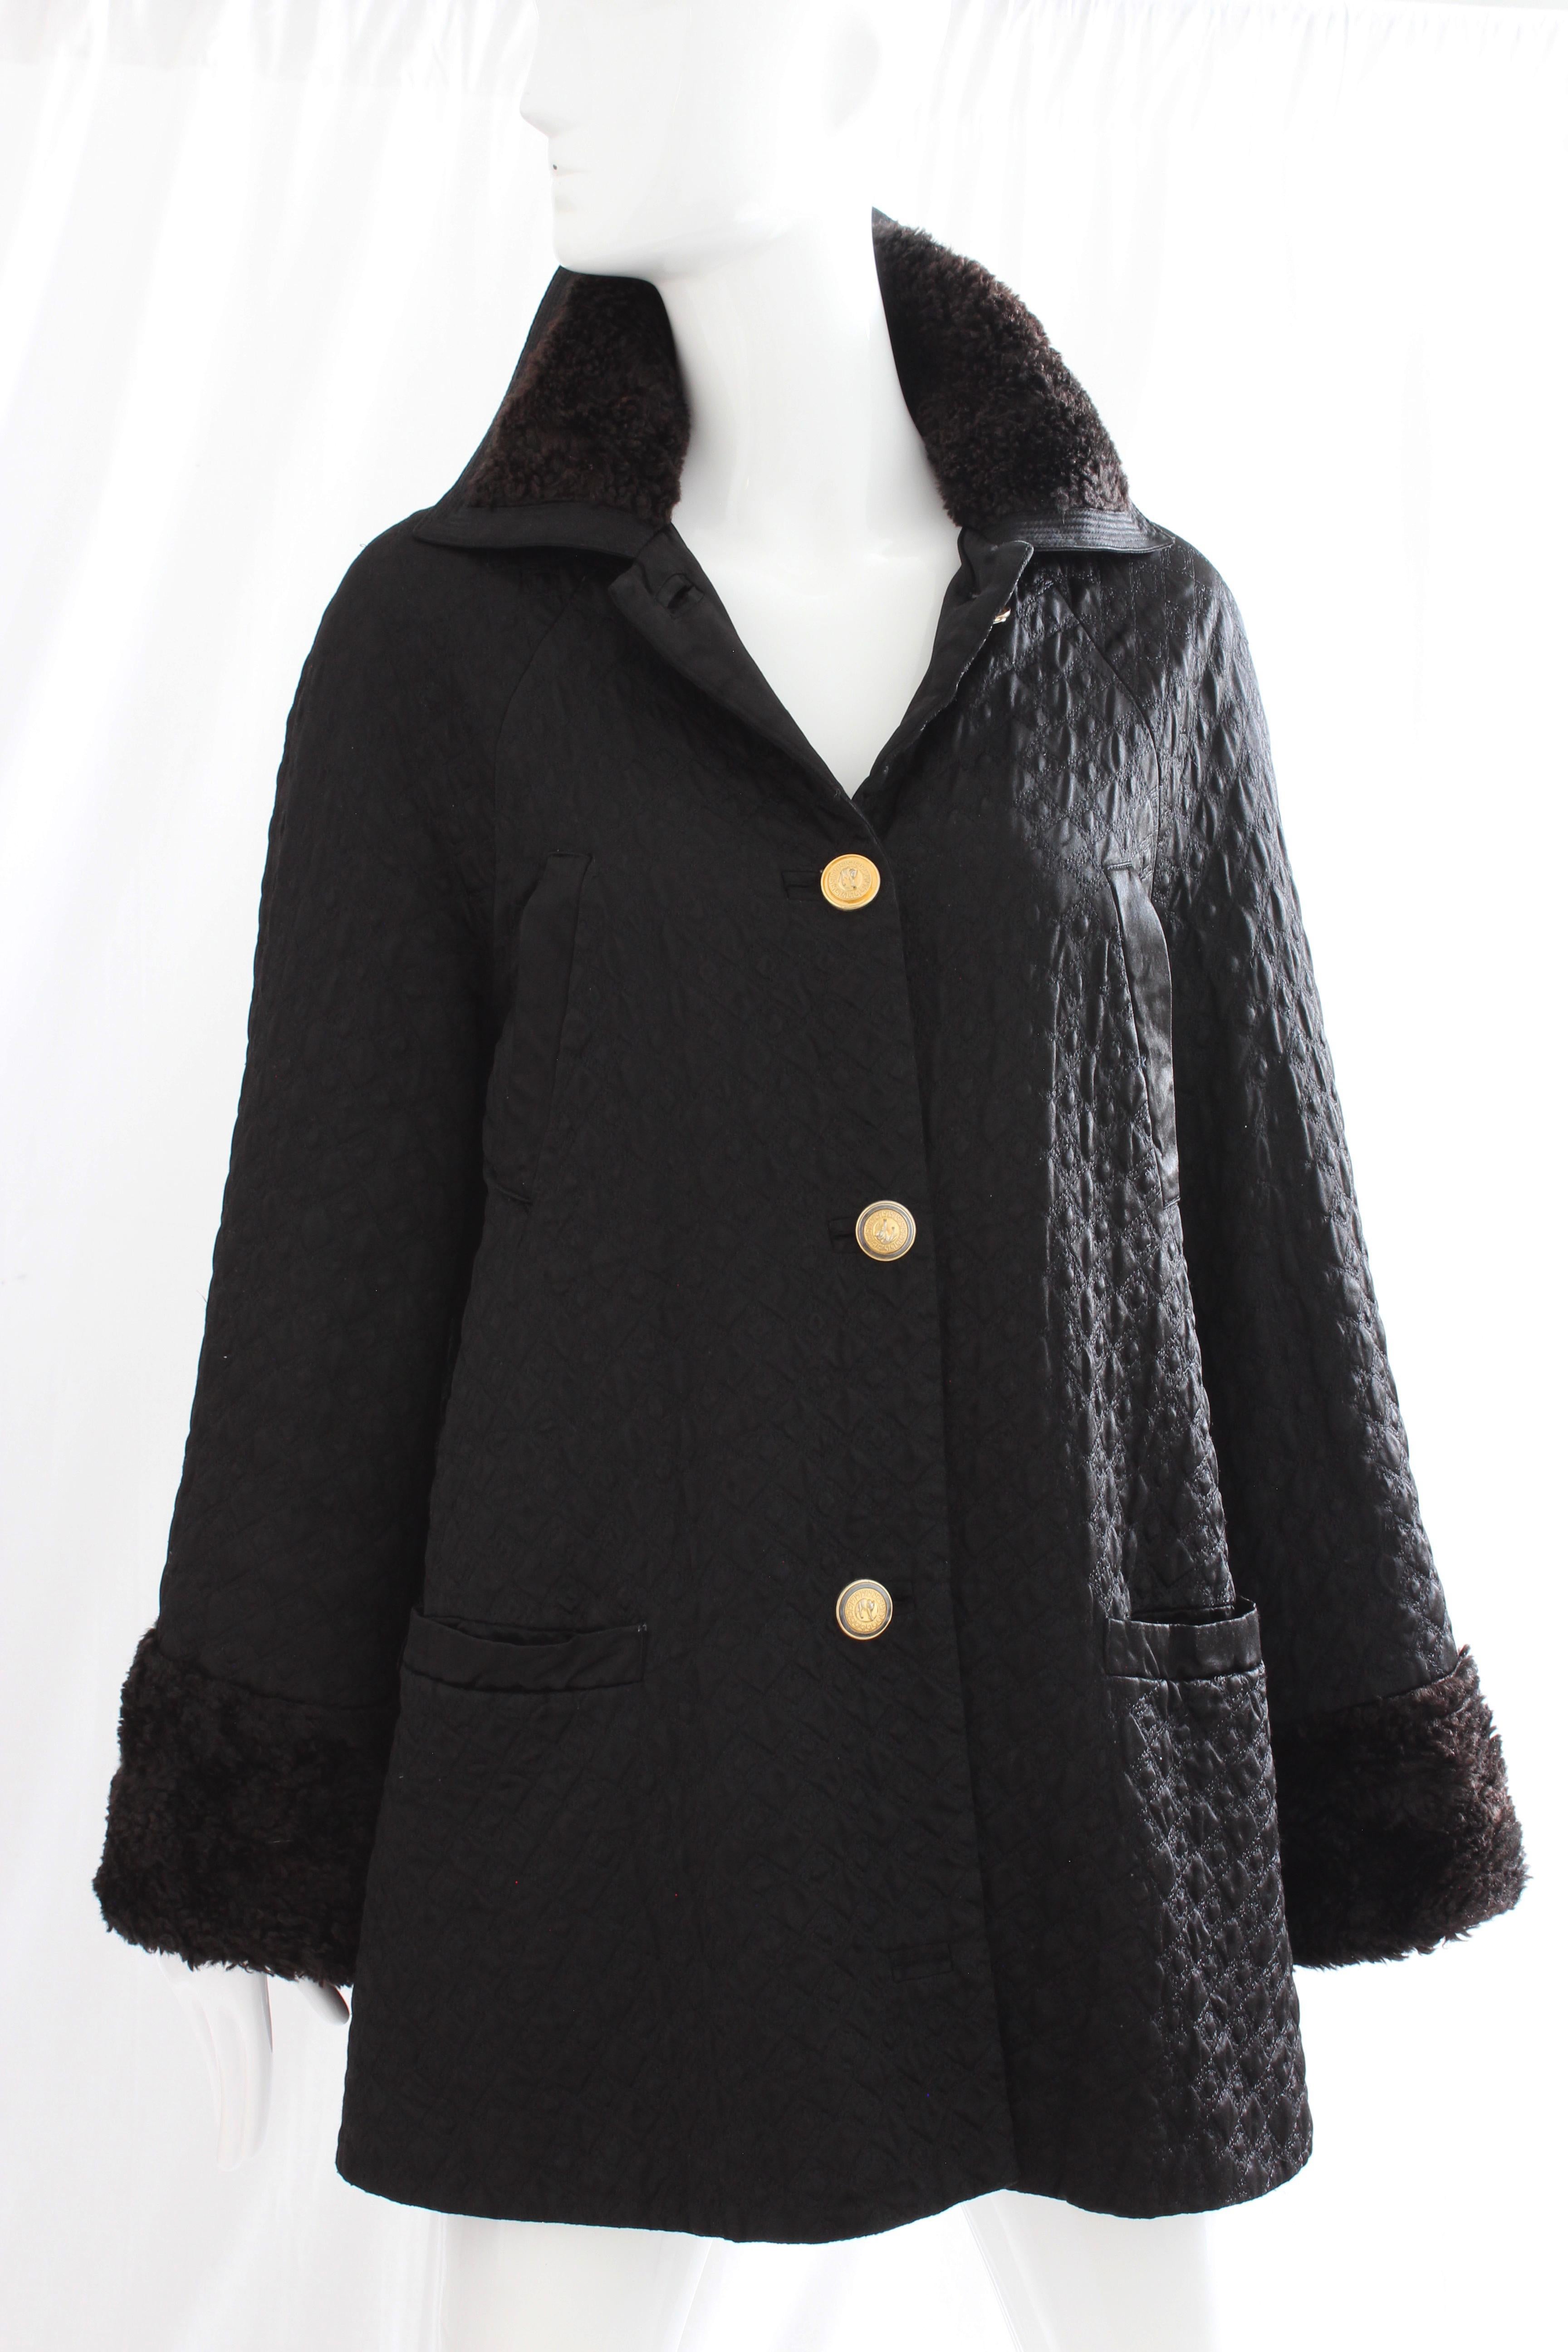 Women's Gianni Versace Jacket or Swing Coat Diamond Quilted Black Satin with Fur Trim 38